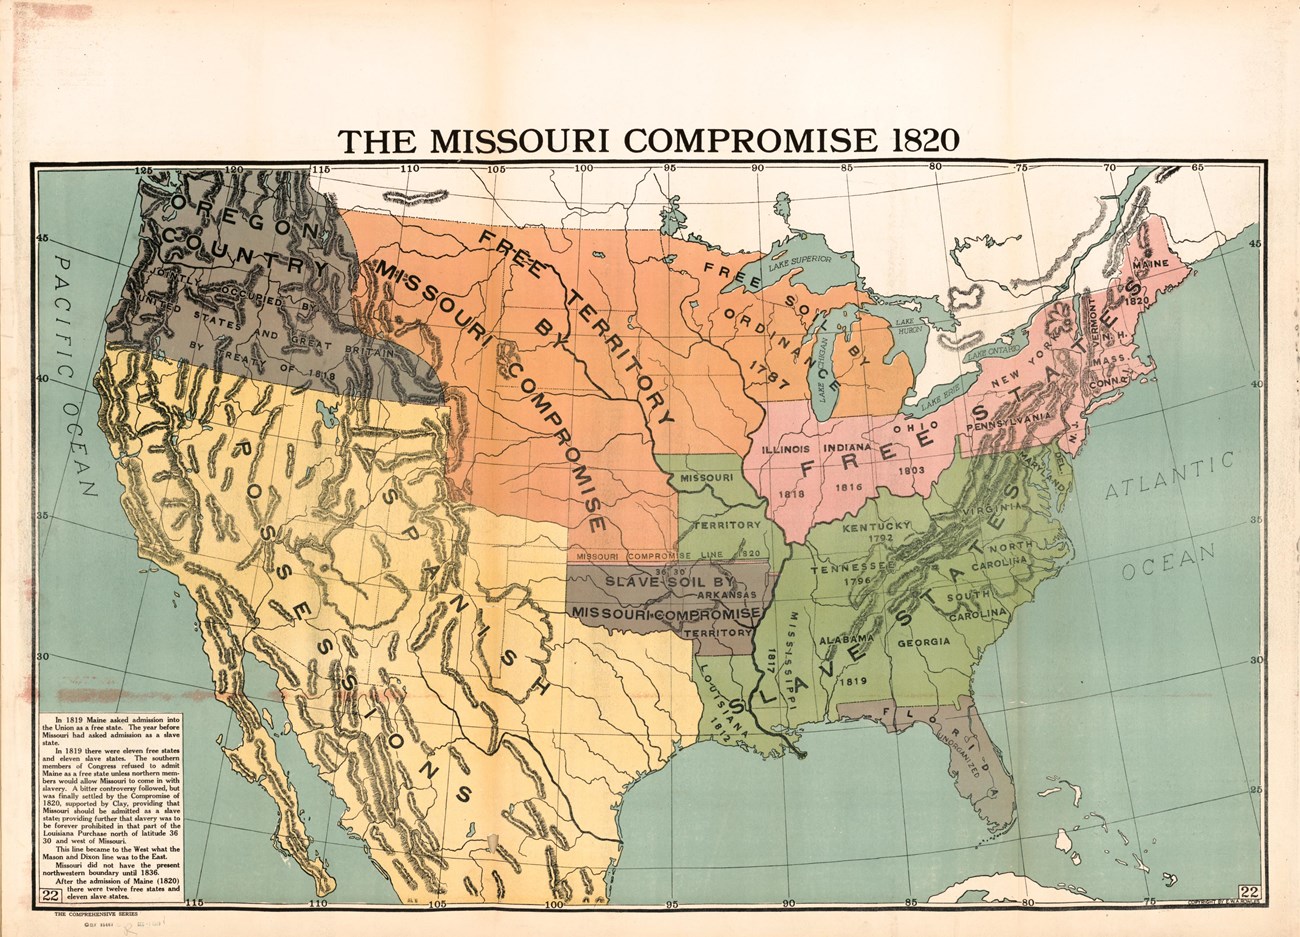 Map entitled "The Missouri Compromise 1820" showing Missouri's admittance as a slave state into the Union.